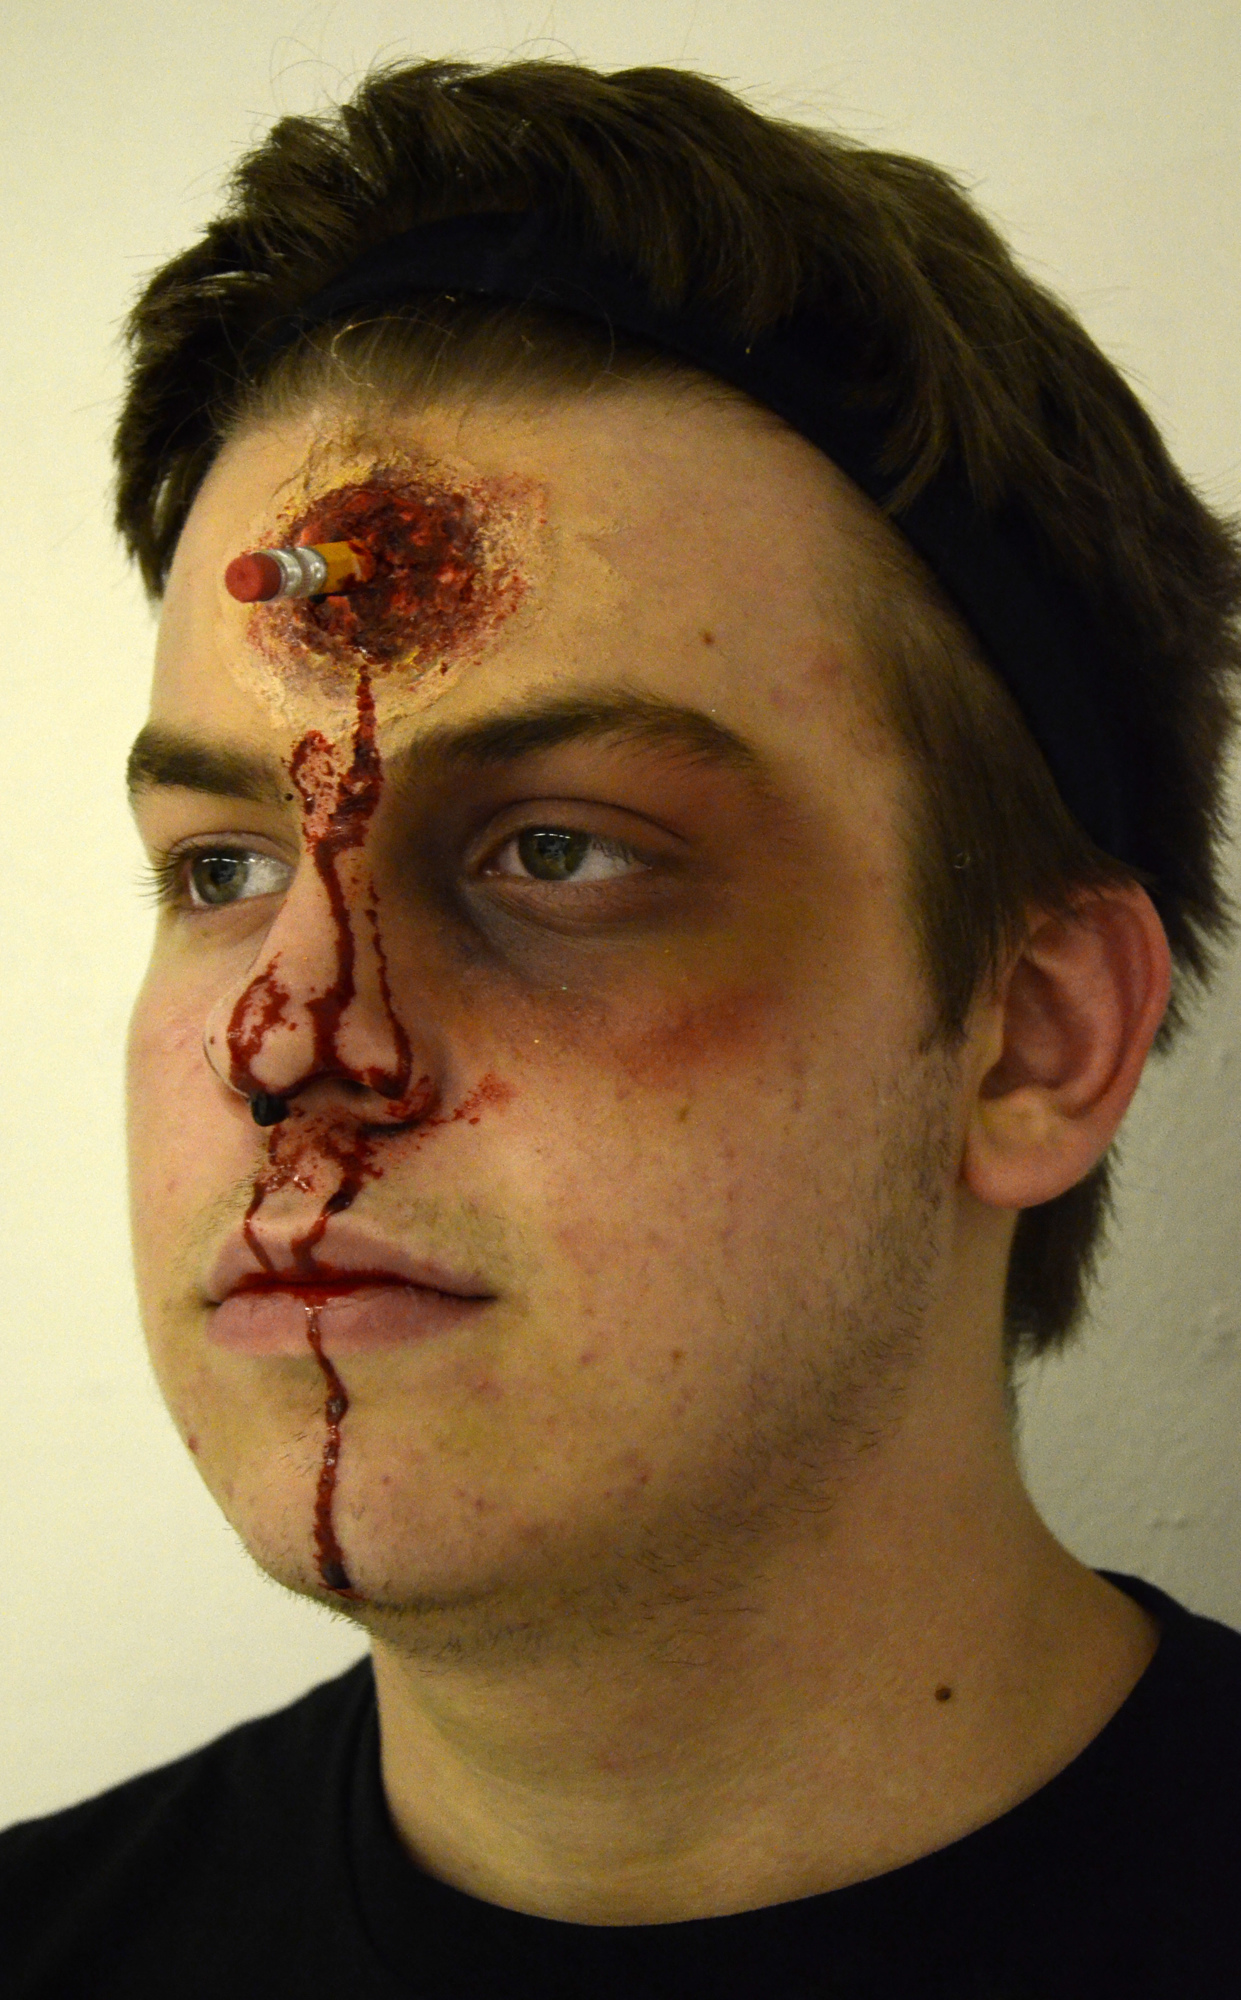 Jackson Helwege's bloody student look is complete after Rachel Knowles, makeup artist, glued a pencil into the original gunshot wound to change the look.